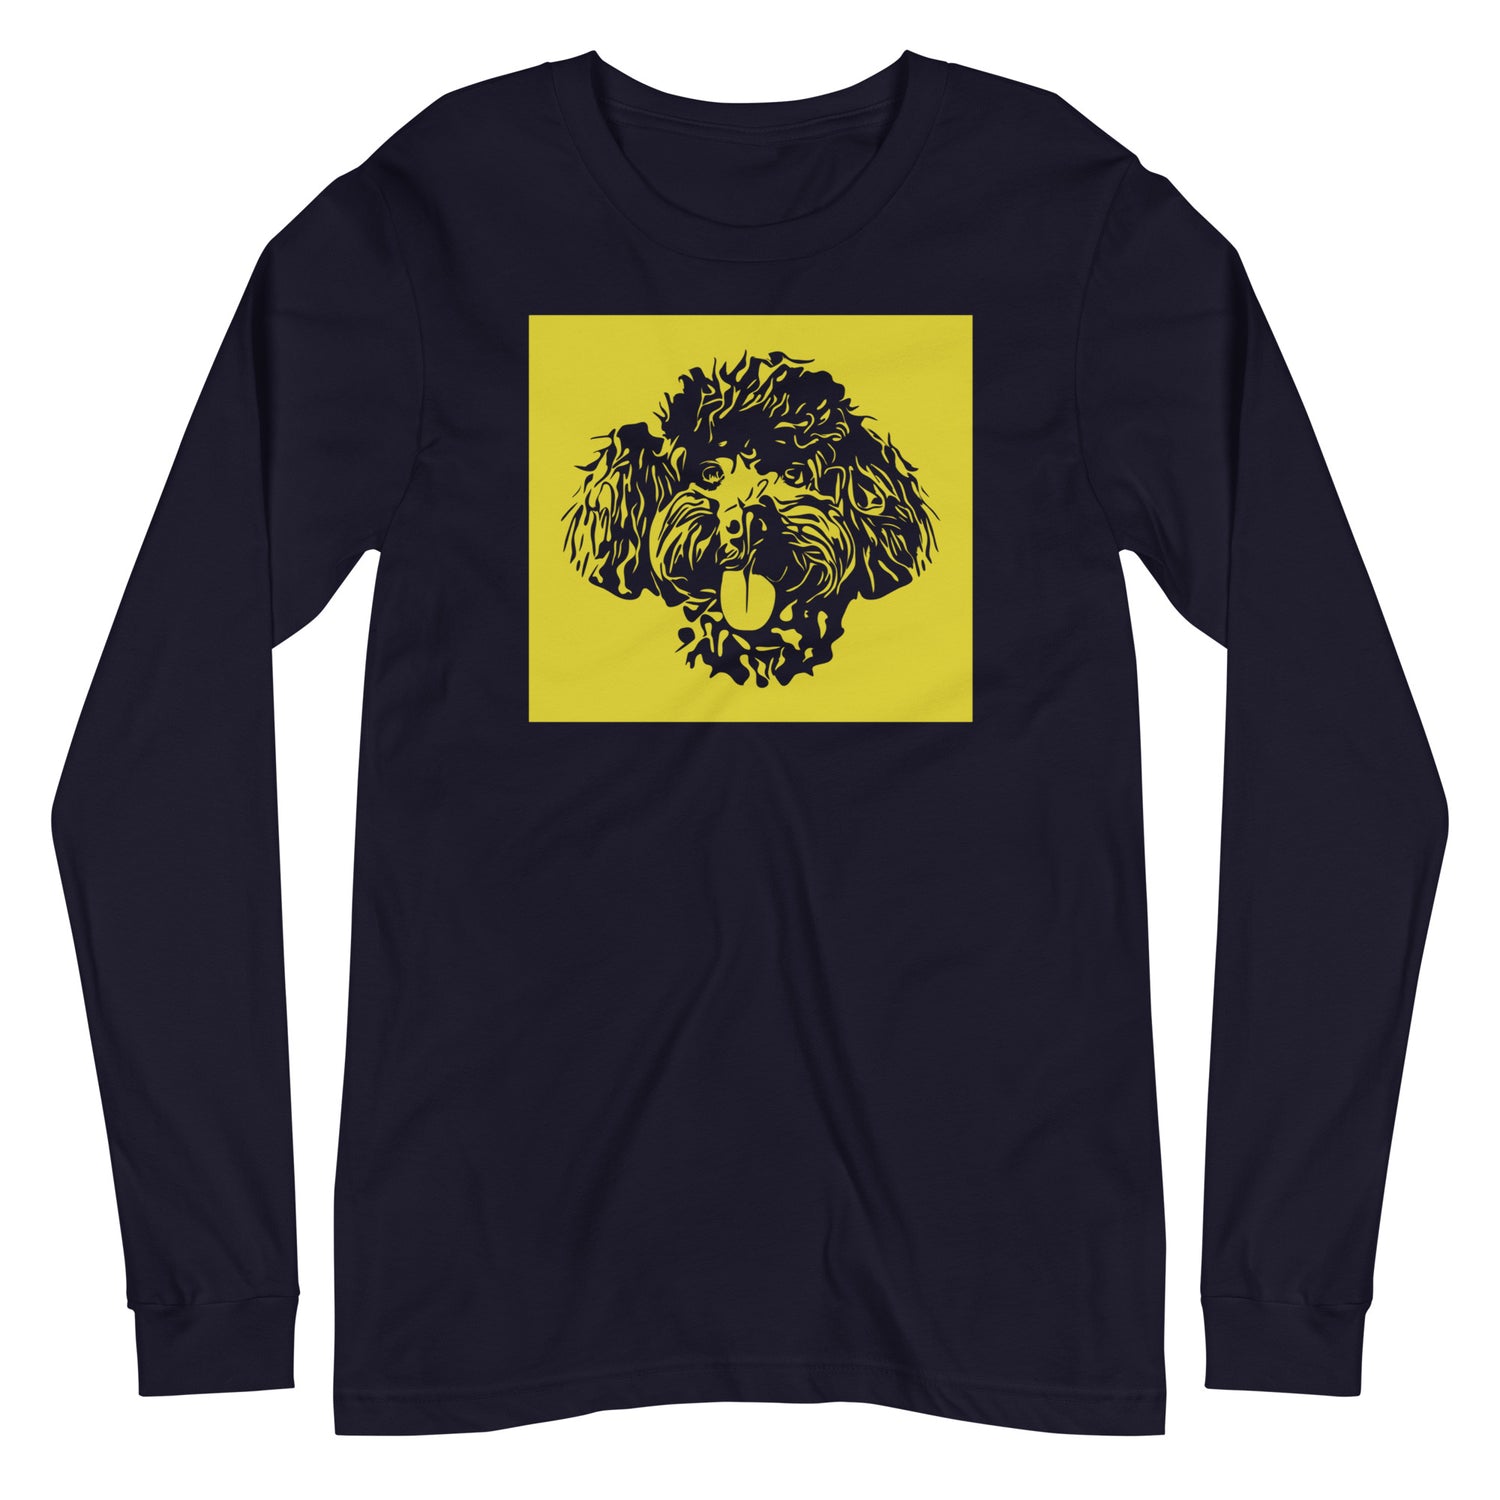 Toy Poodle face silhouette with yellow background square on unisex navy long sleeve t-shirt